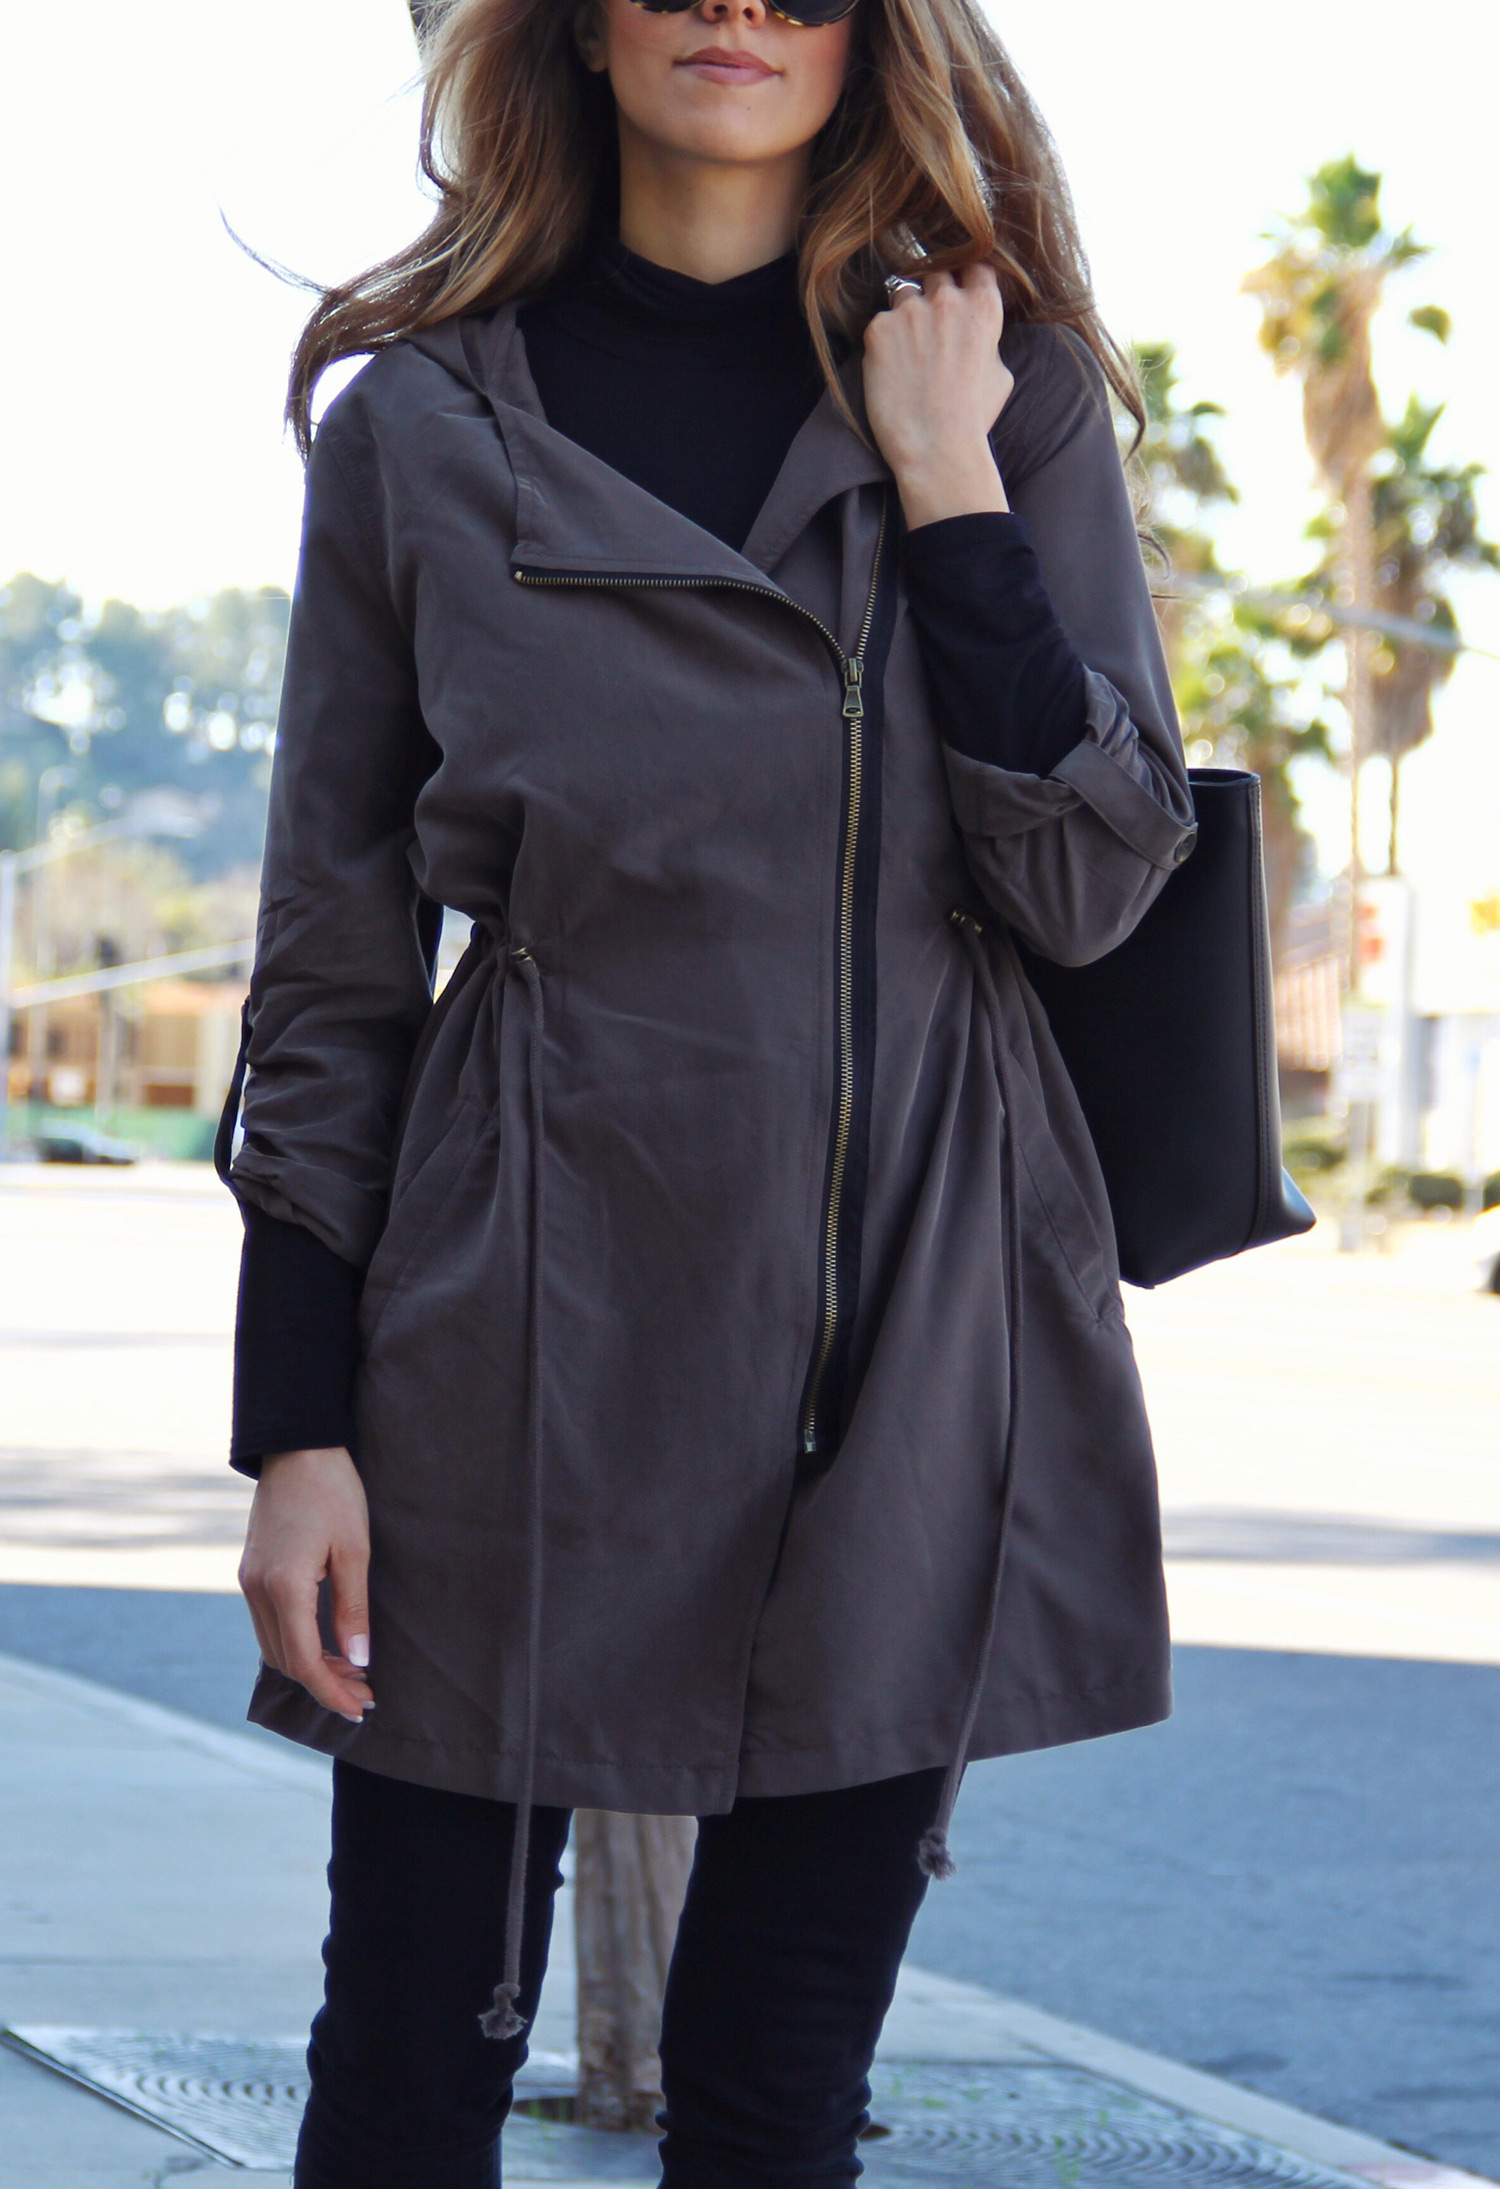 Wearing Olive | The Charming Olive by Adelina Perrin